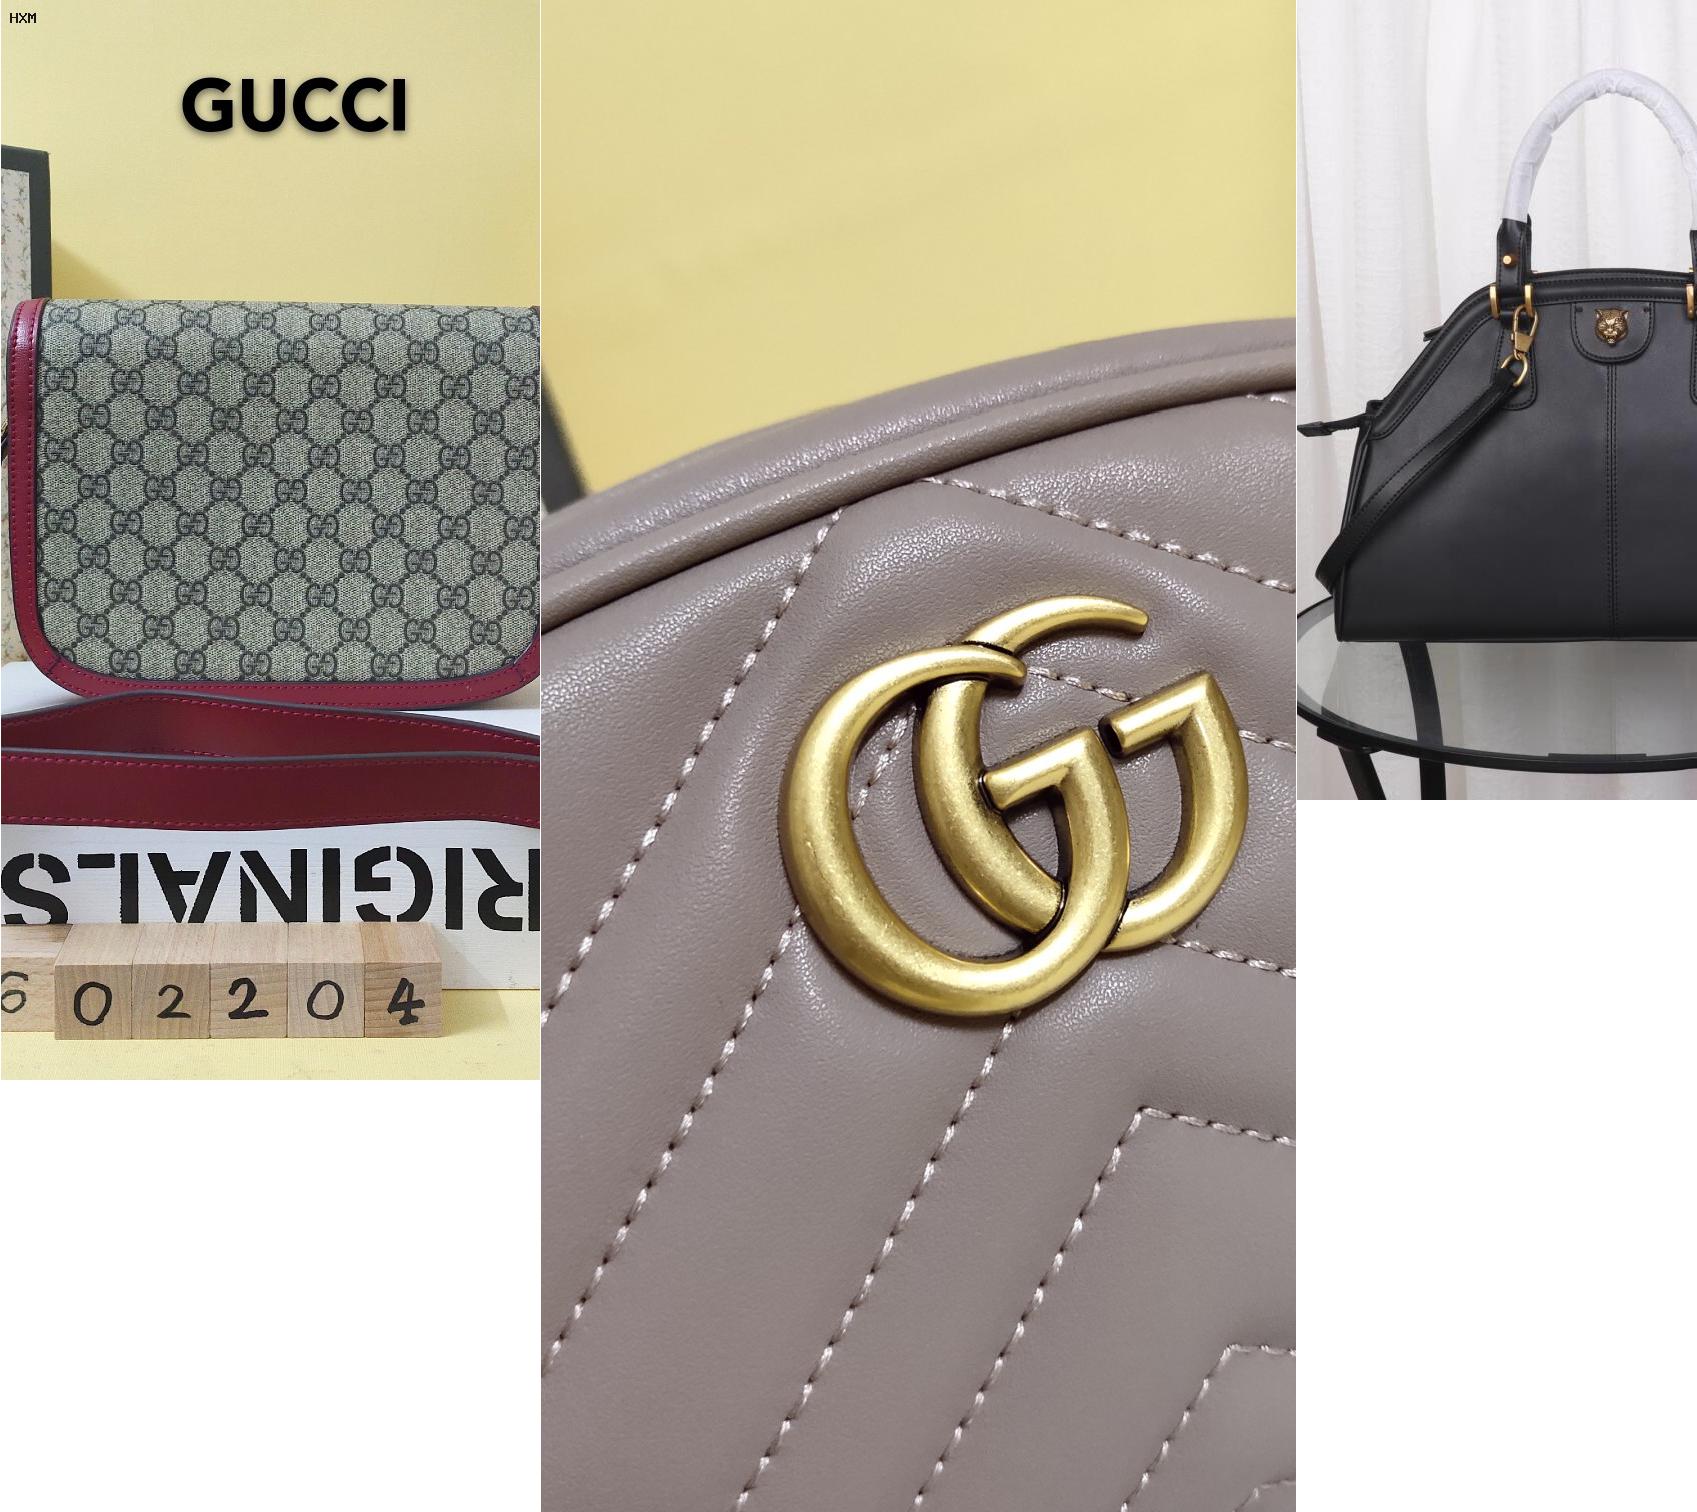 fausse sacoche gucci vinted